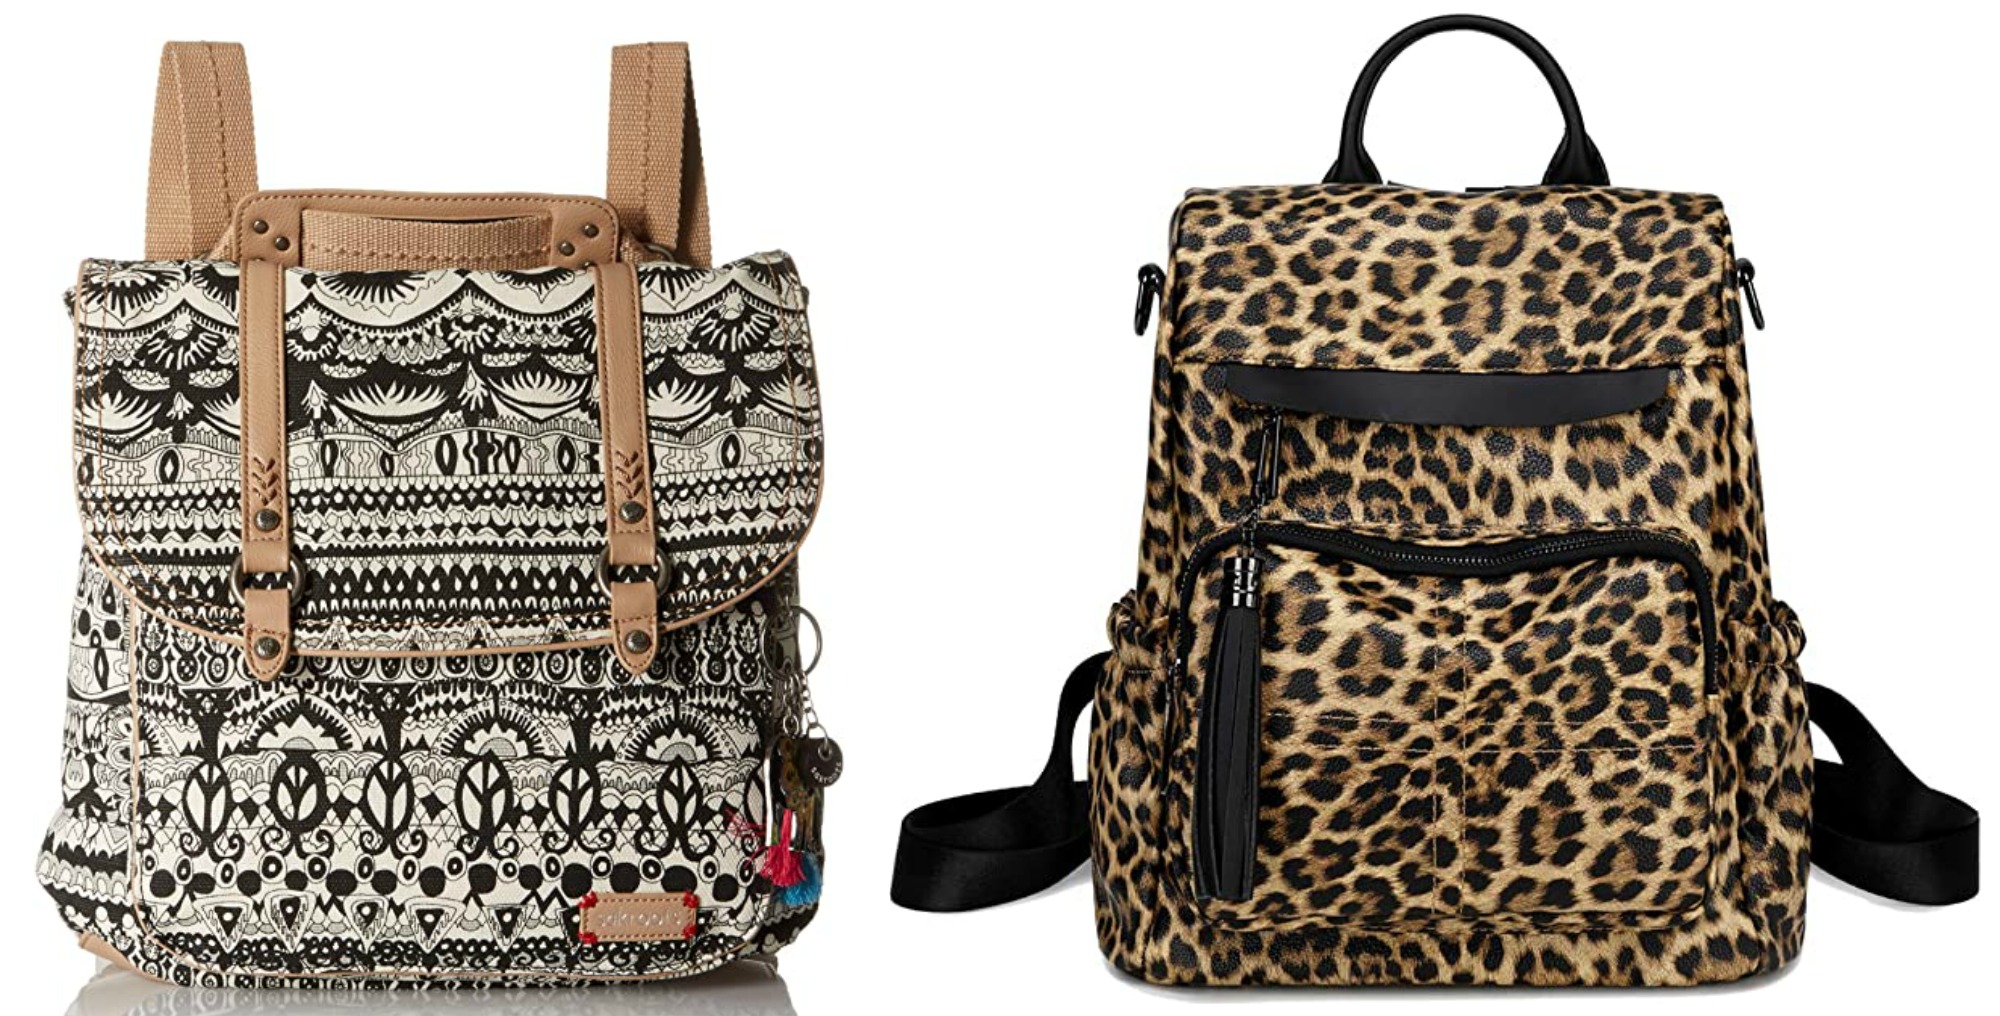 travel backpack with detachable purse